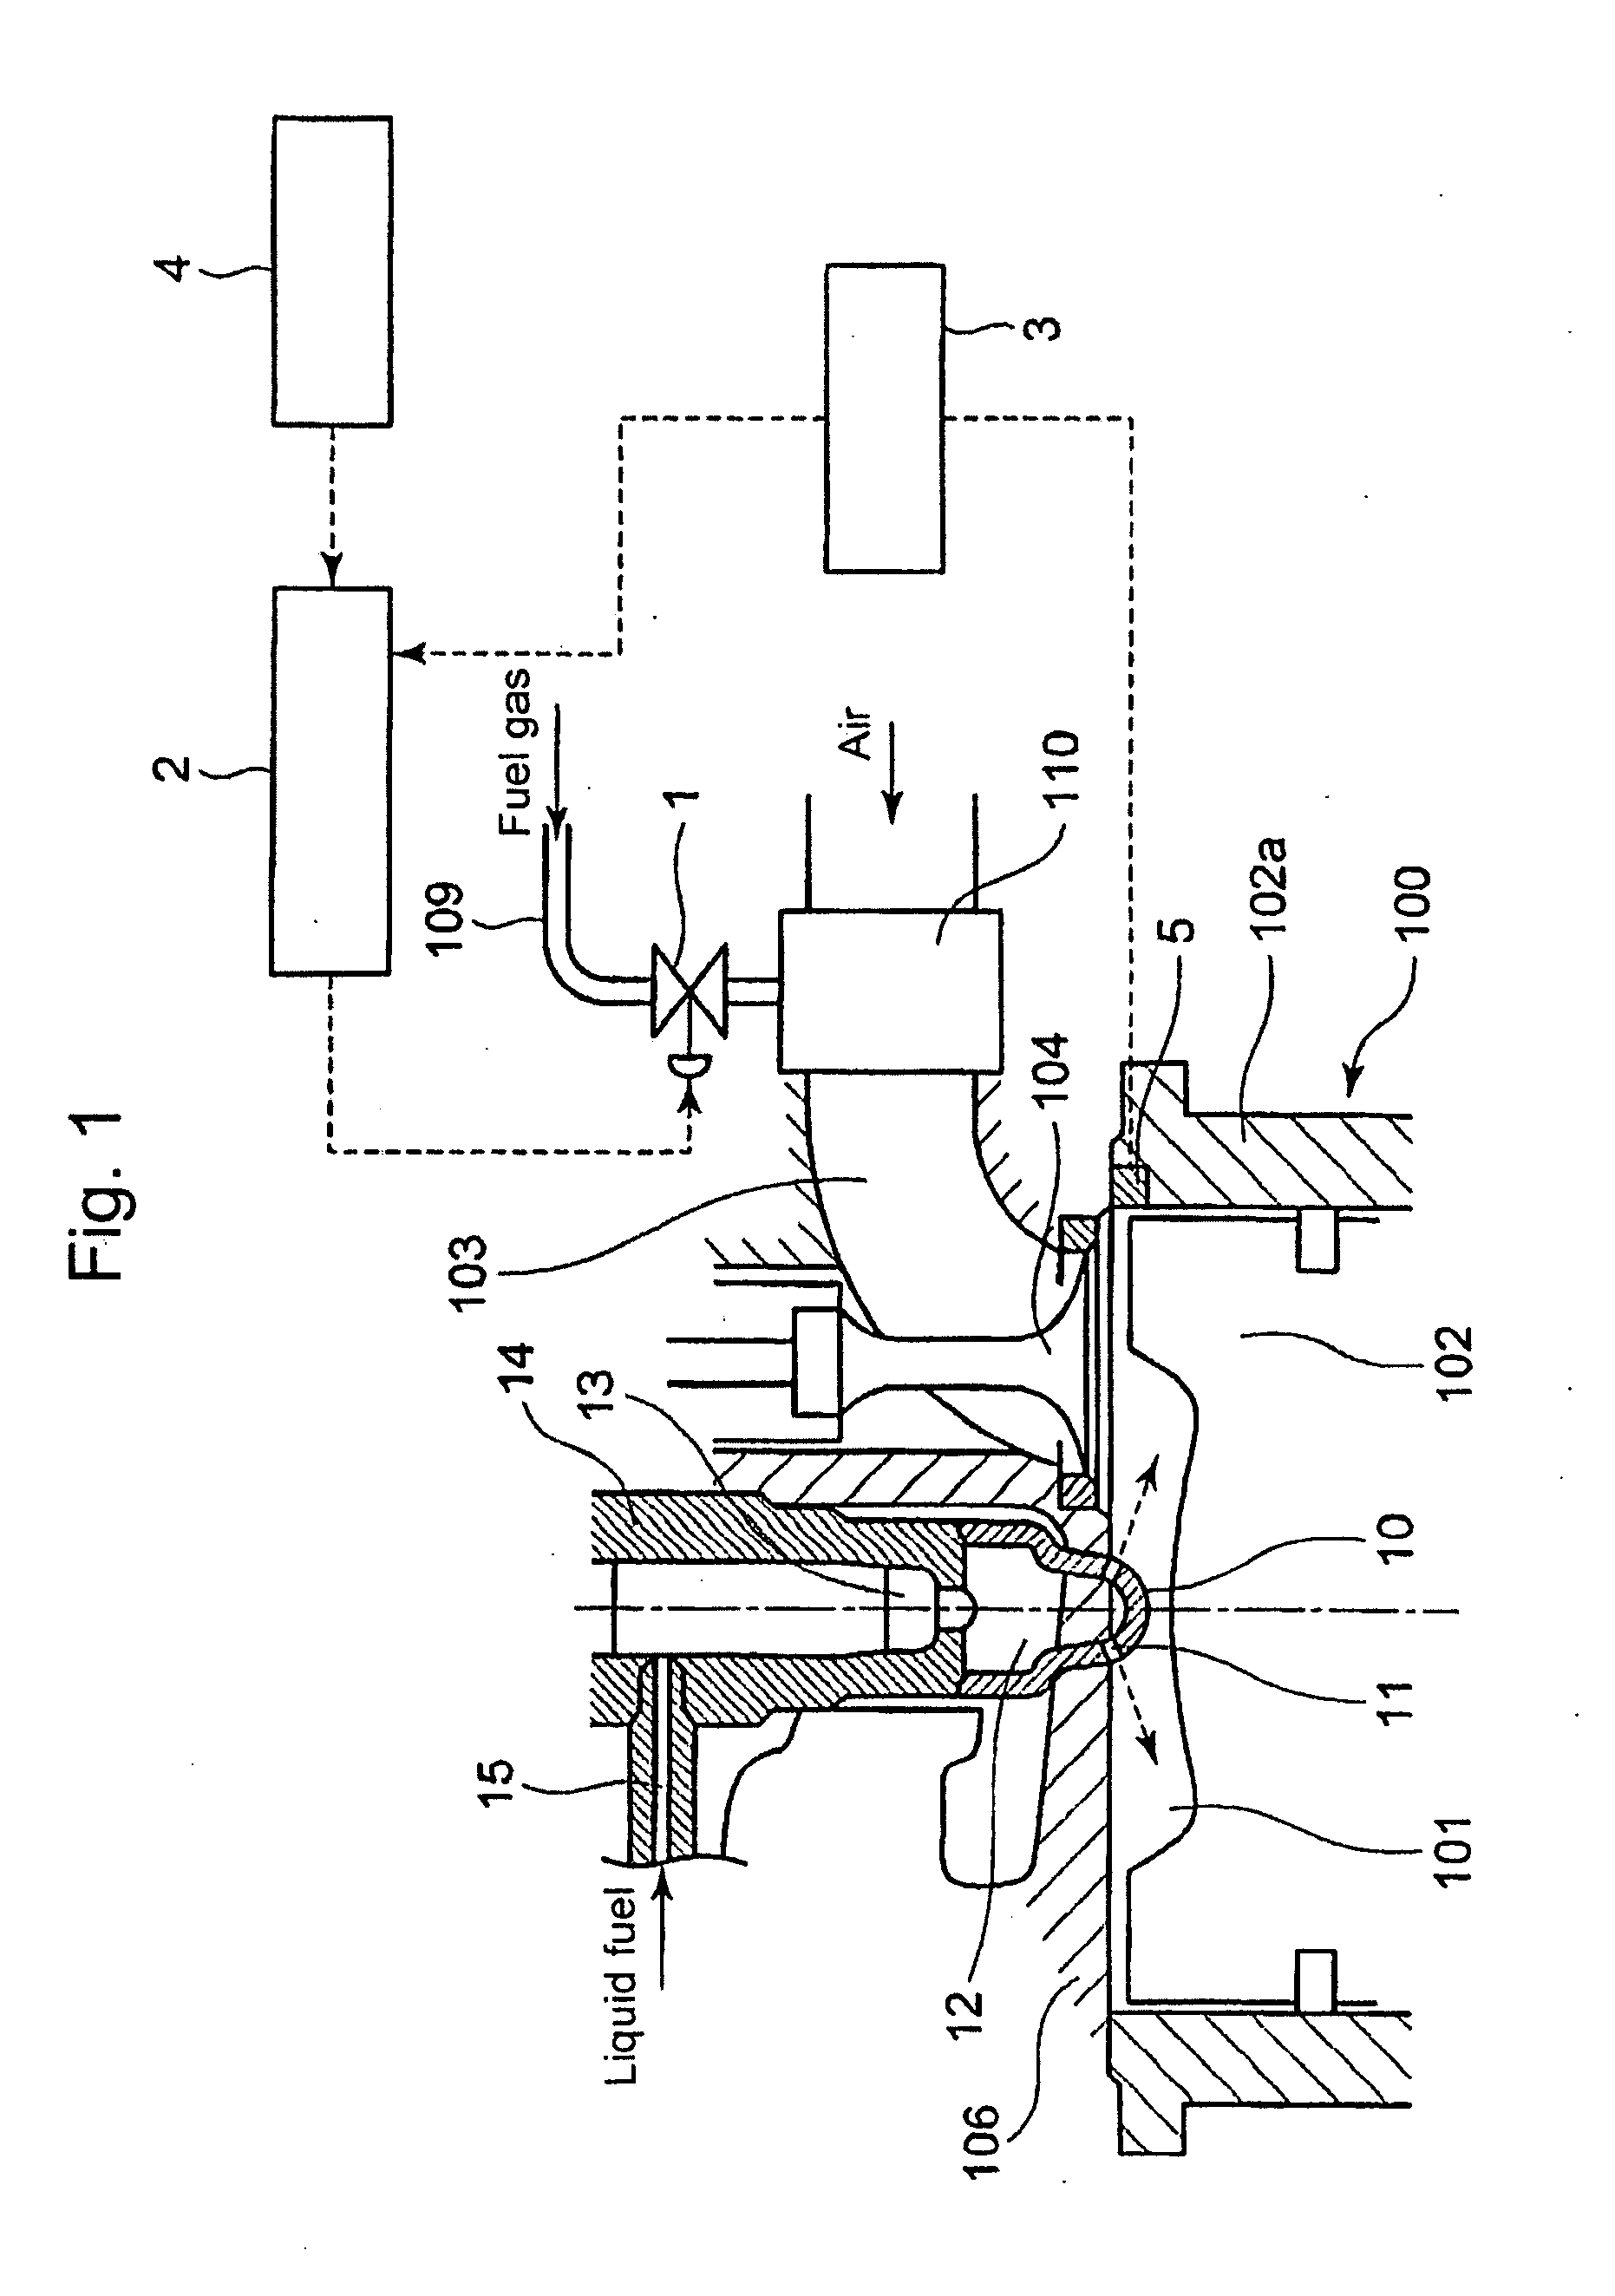 Micro-pilot injection ignition type gas engine